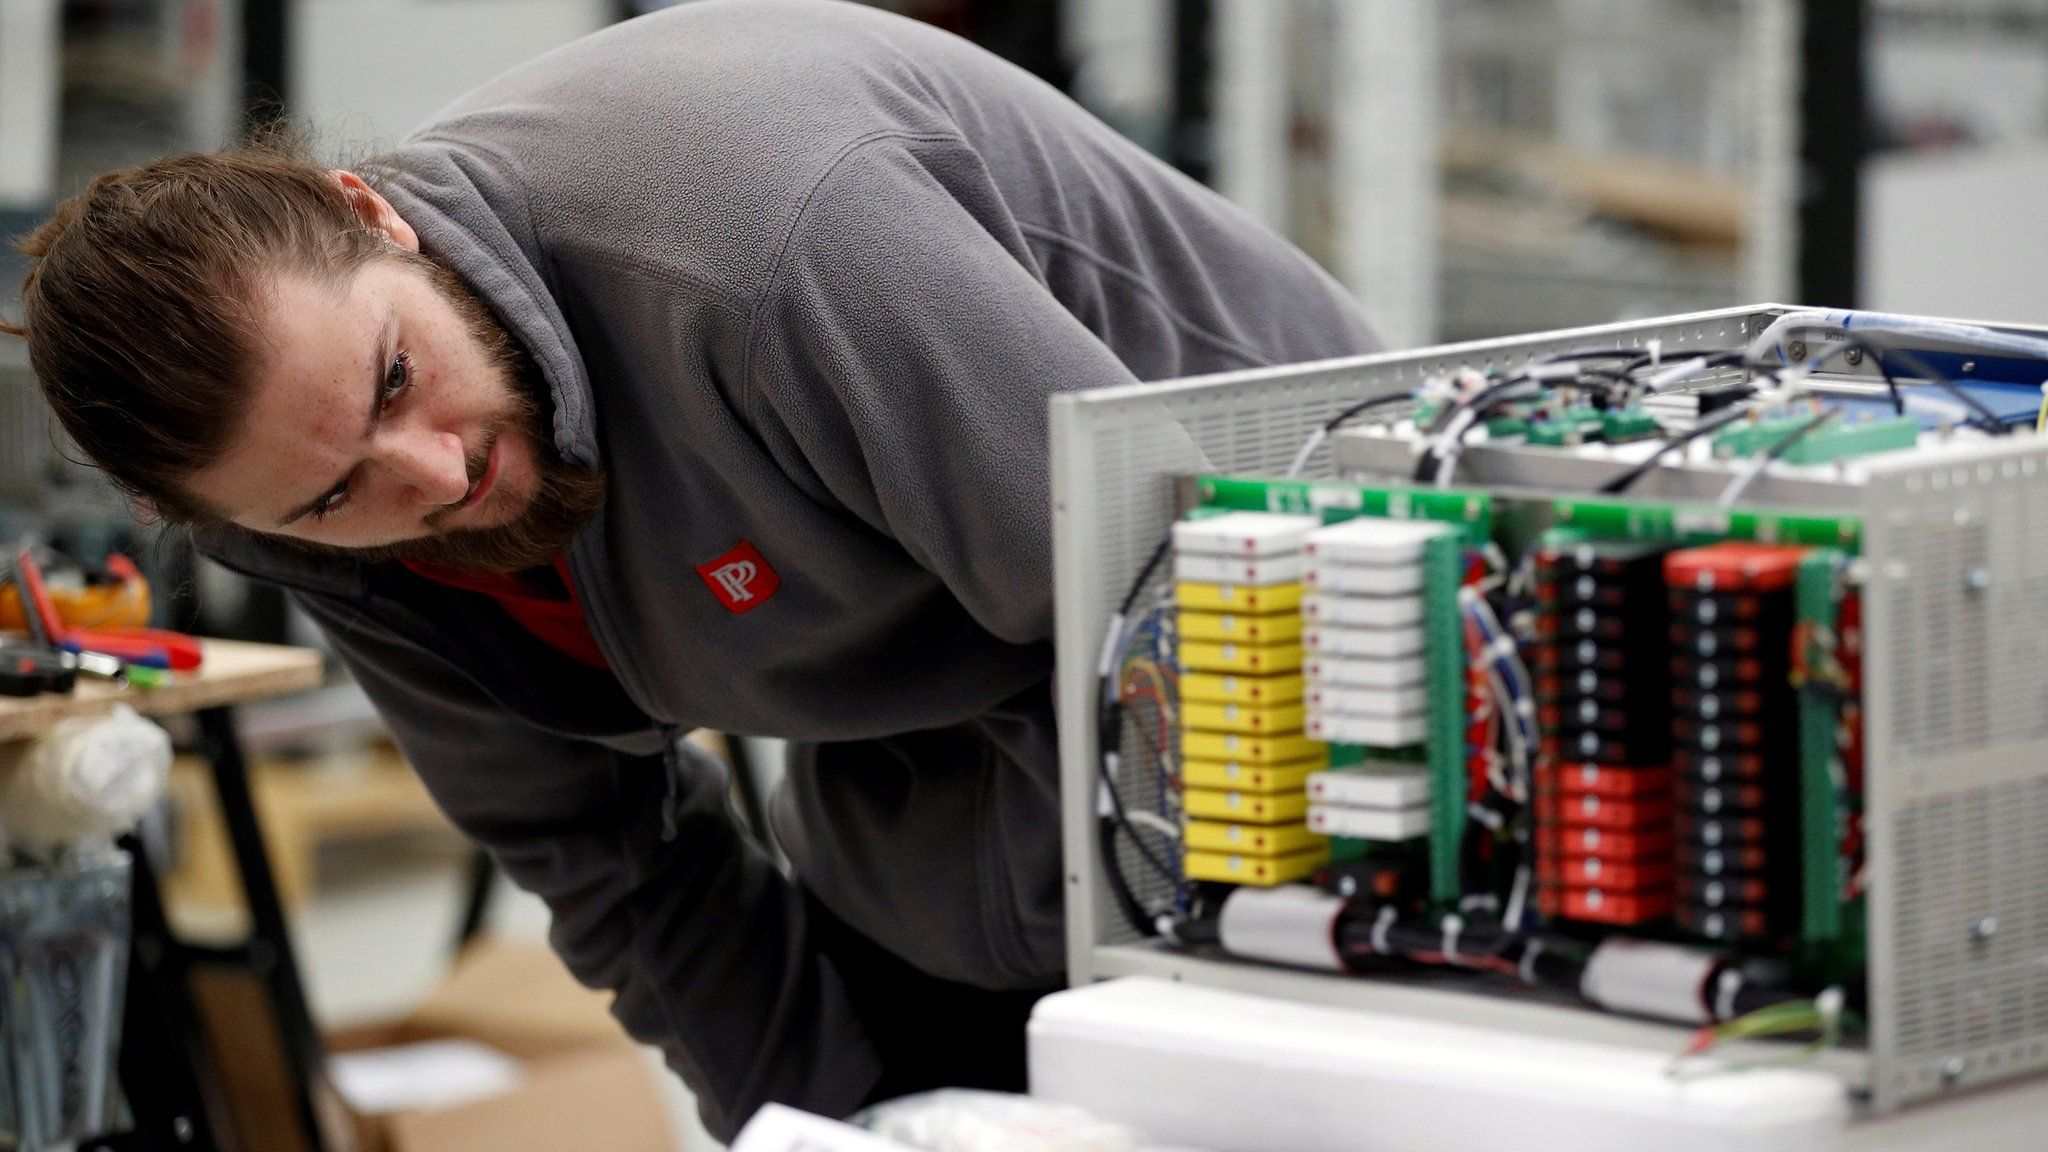 A worker examines an electrical component on the factory floor of PP Control and Automation near Cannock